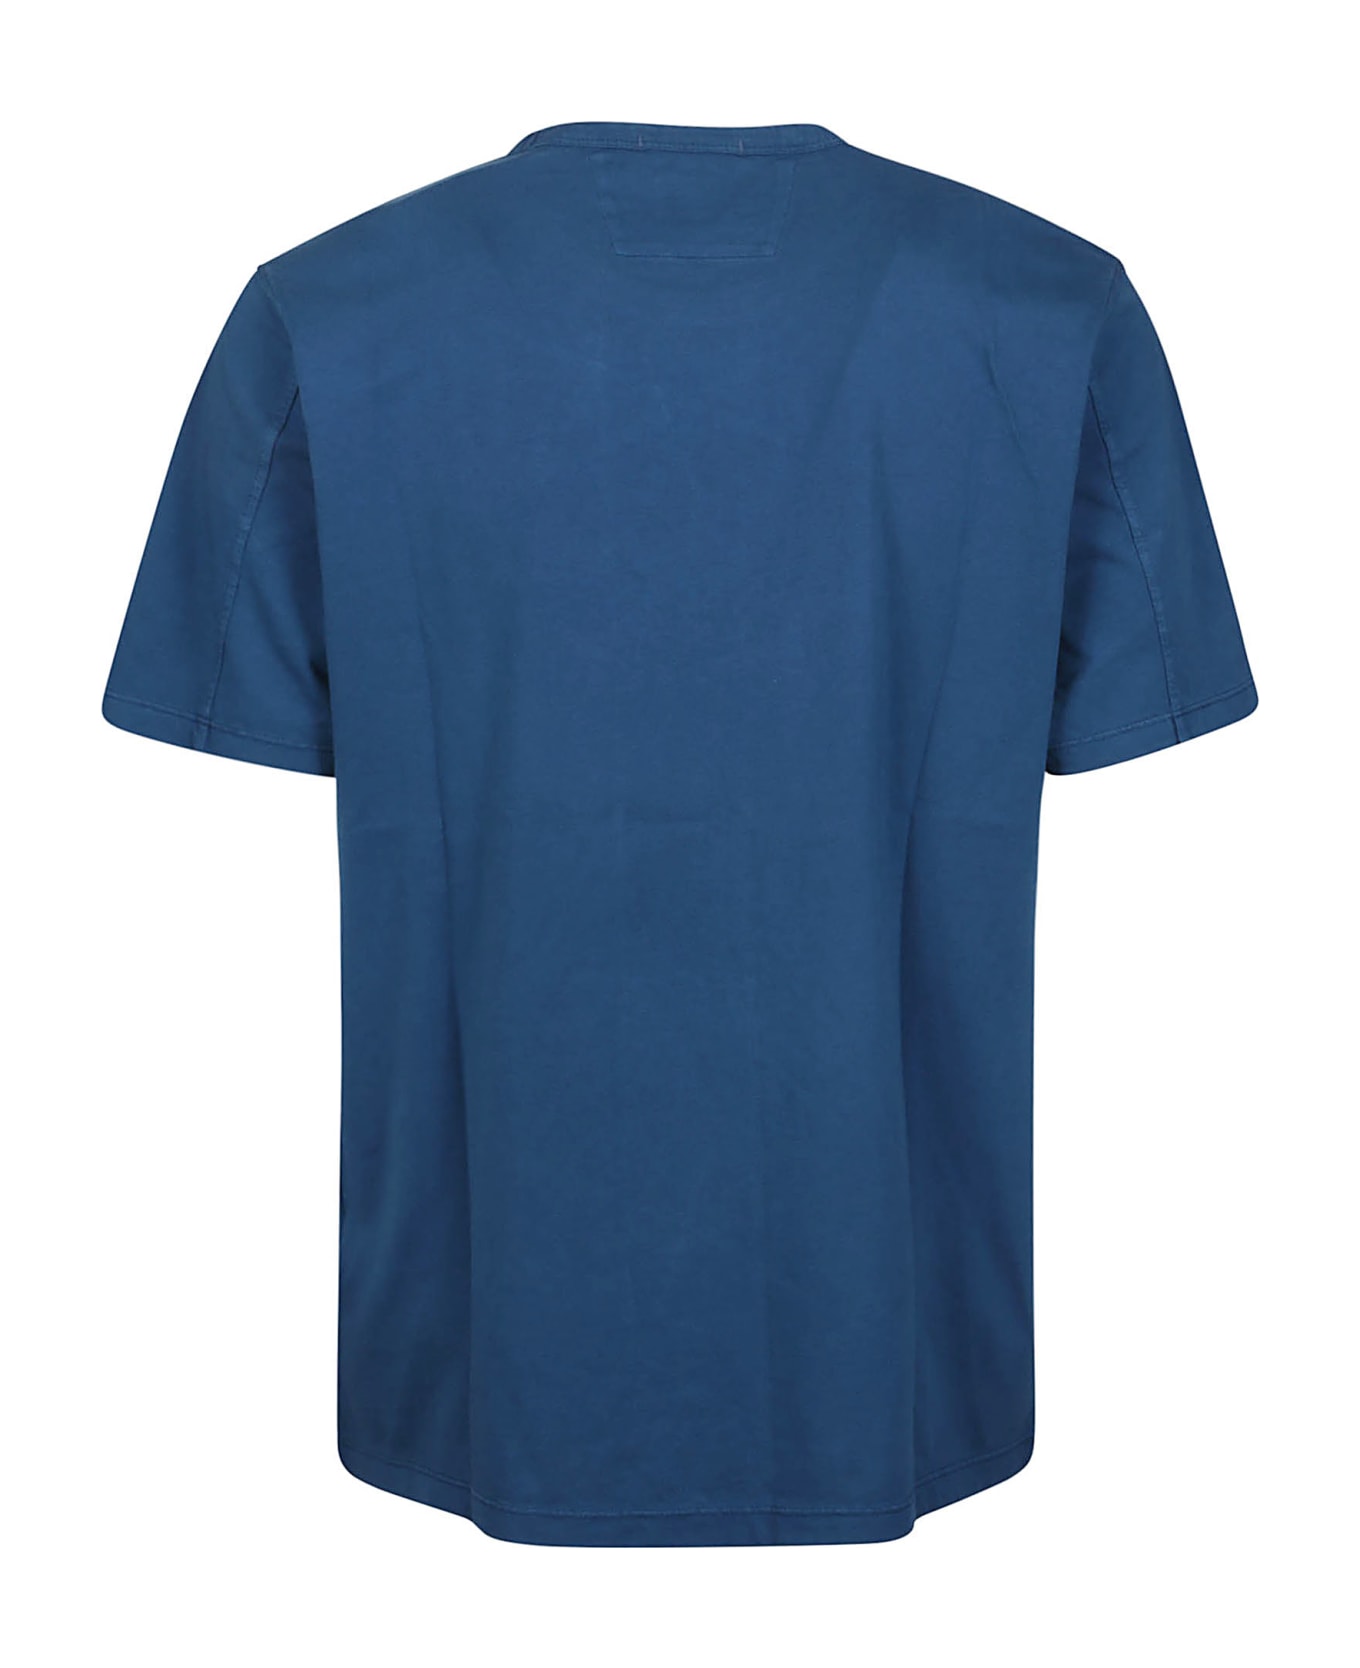 C.P. Company 24/1 Jersey Resist Dyed Logo T-shirt - Ink Blue シャツ